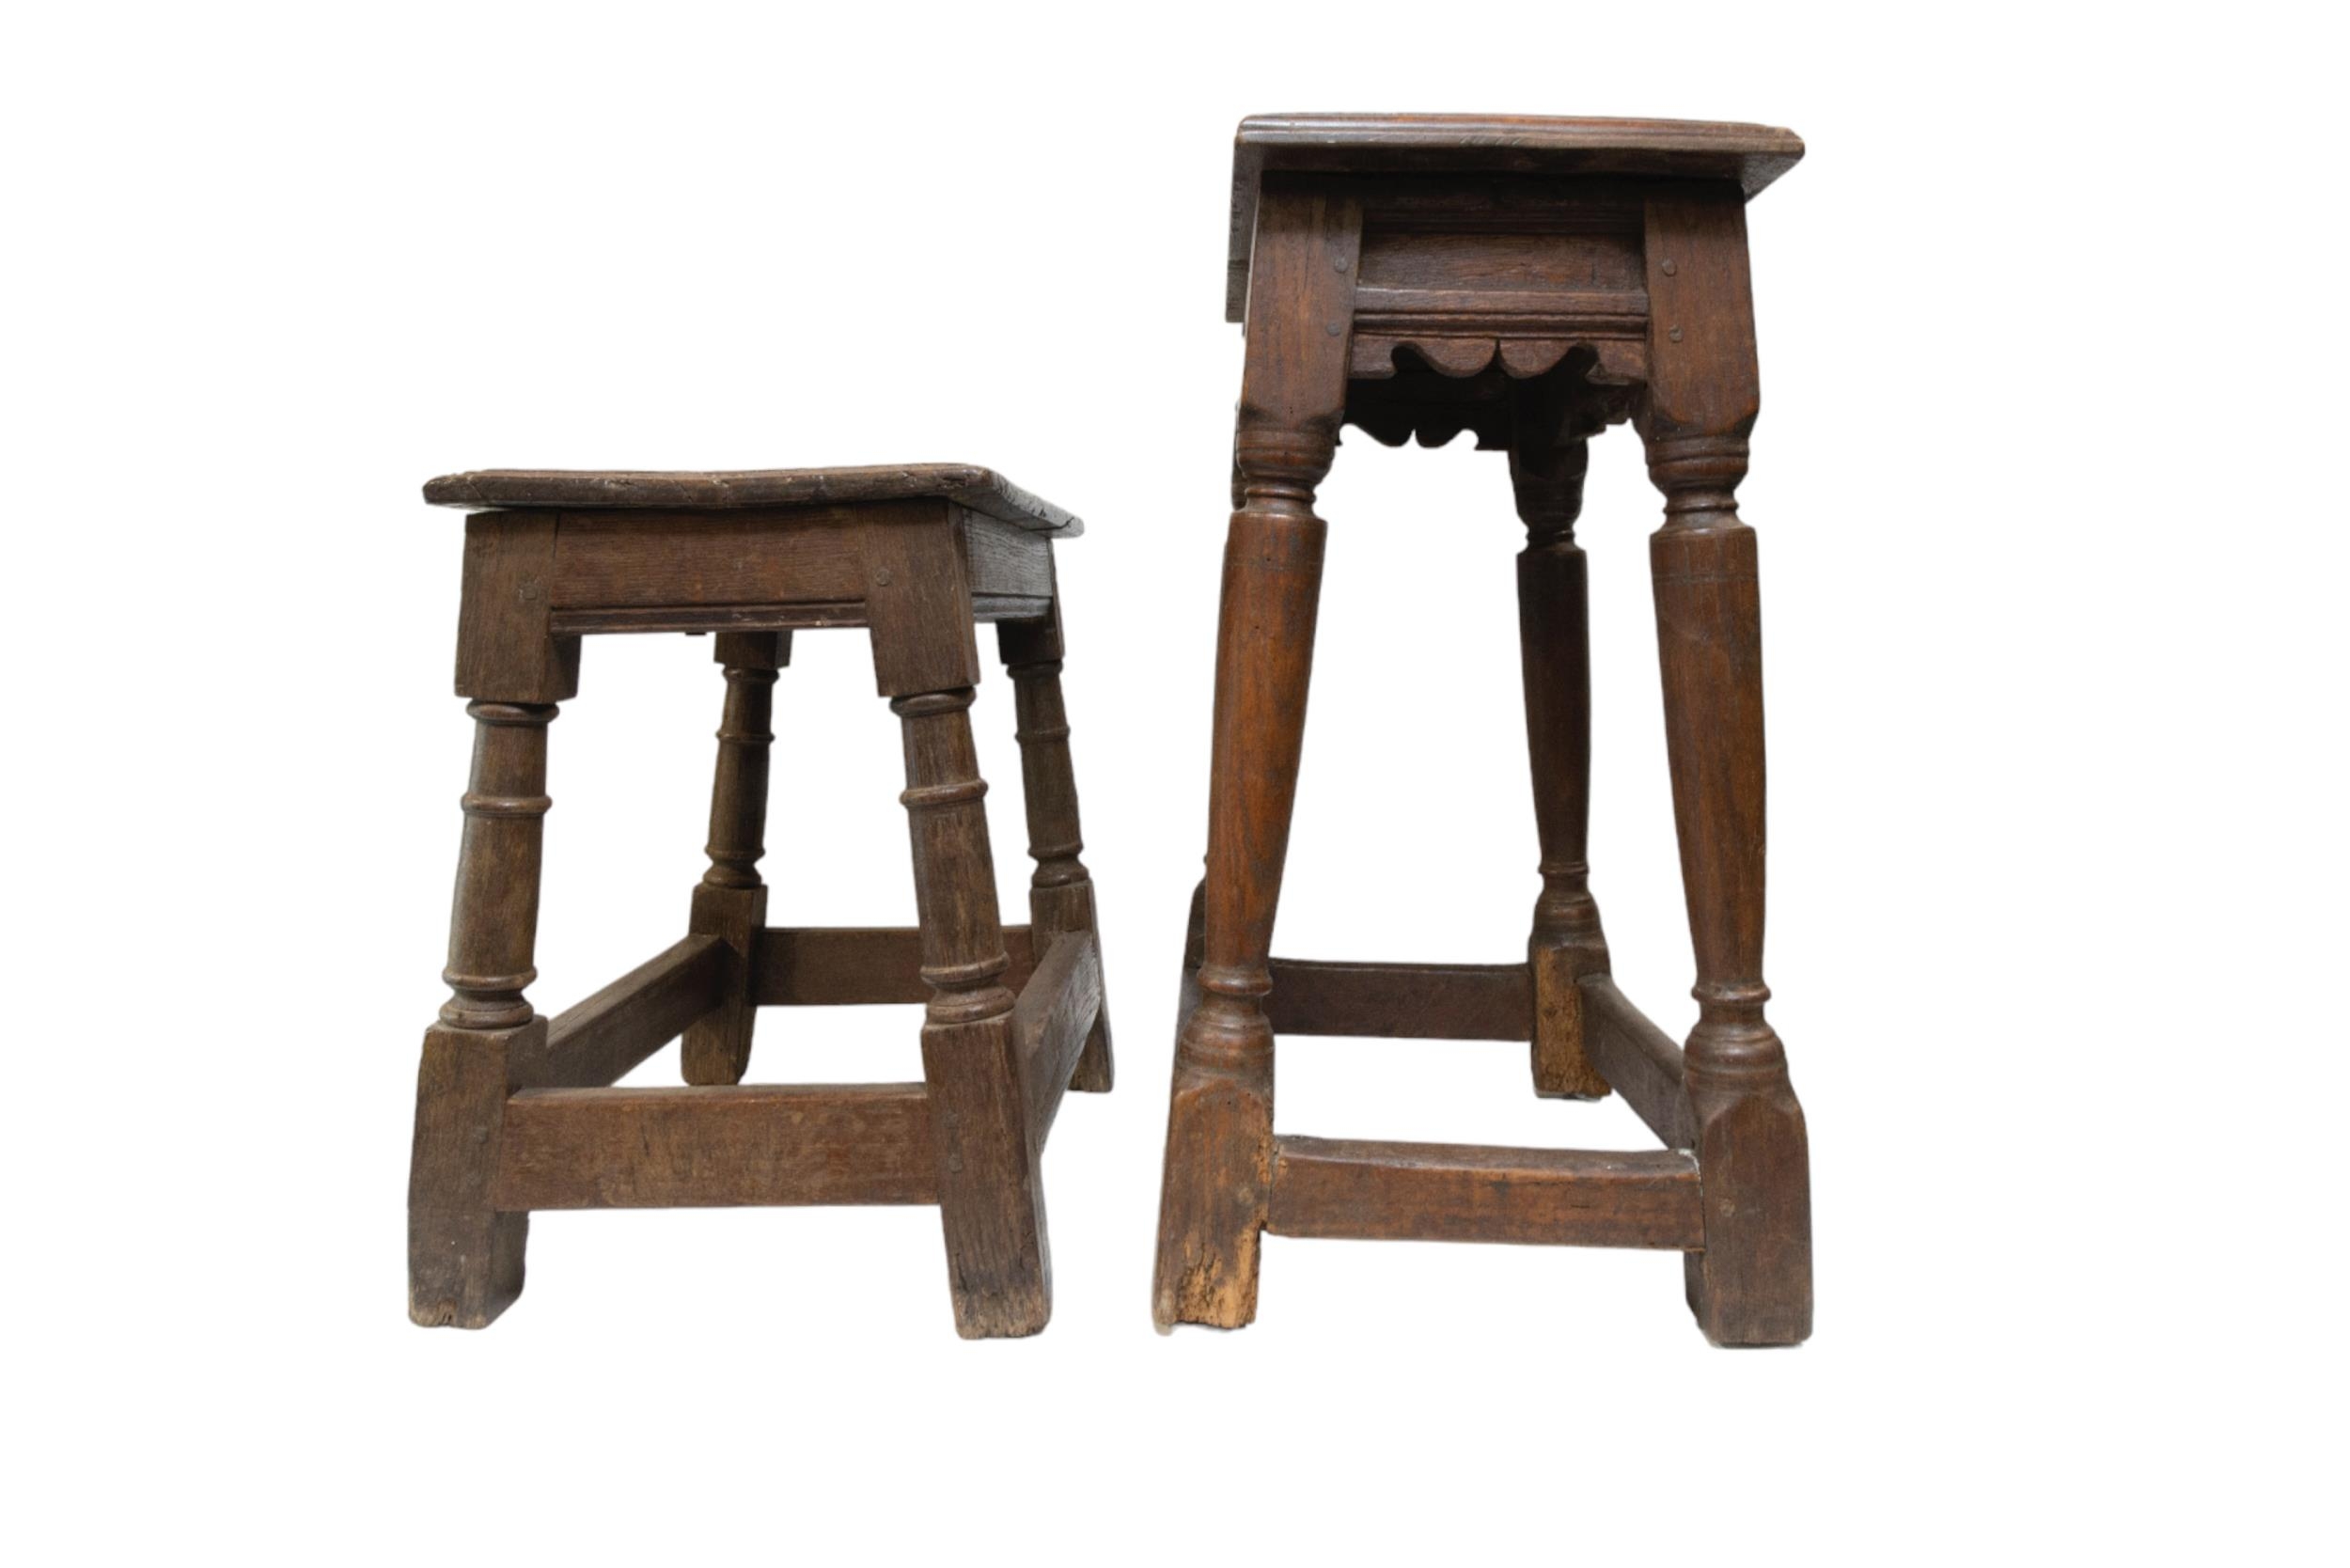 TWO OAK JOINT STOOLS, 18TH CENTURY, both with moulded seat panels raised on ring turned legs - Image 2 of 2